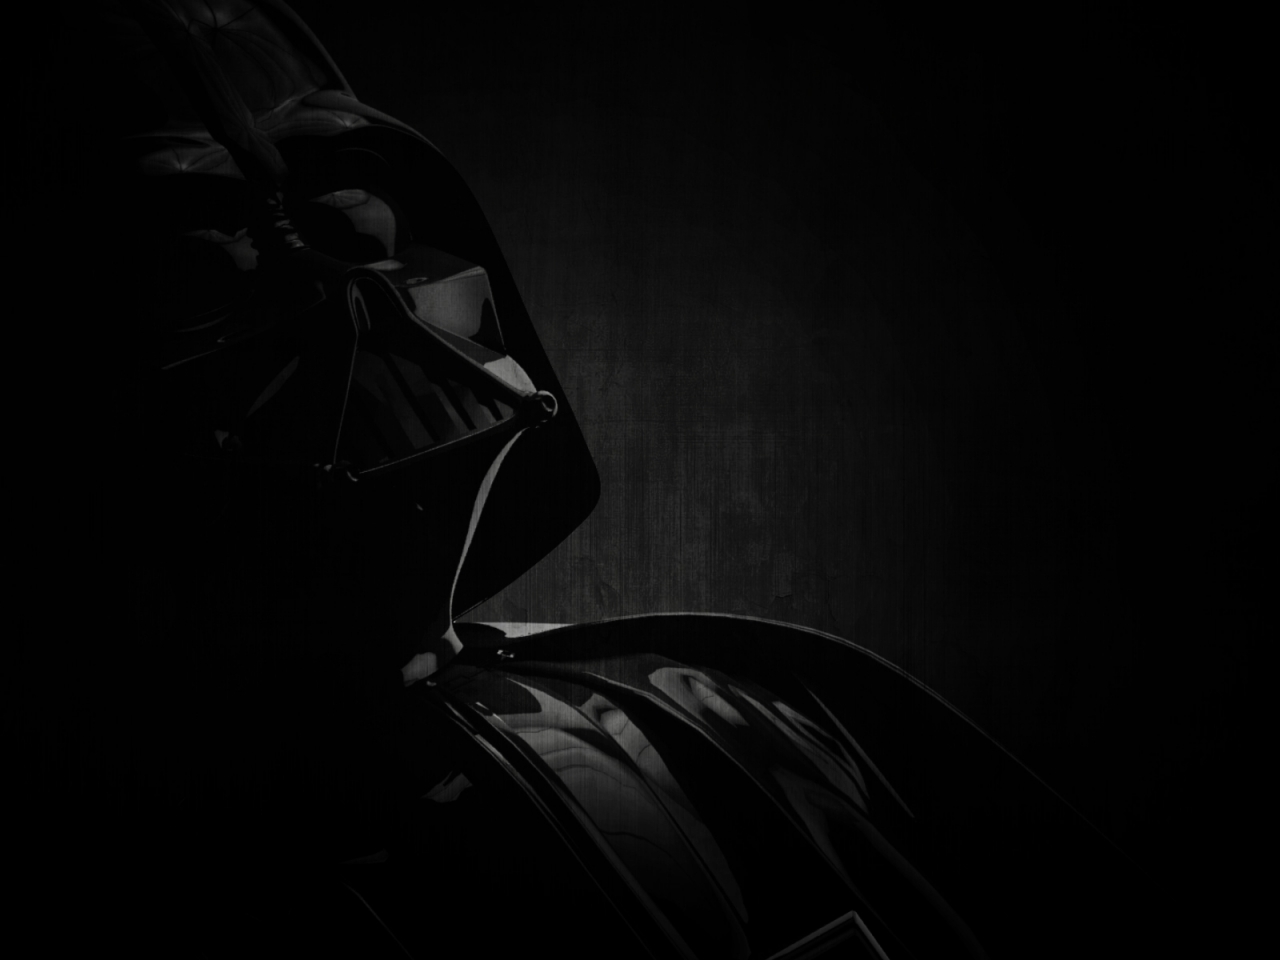 Darth Vader Character, for 1280 x 960 resolution